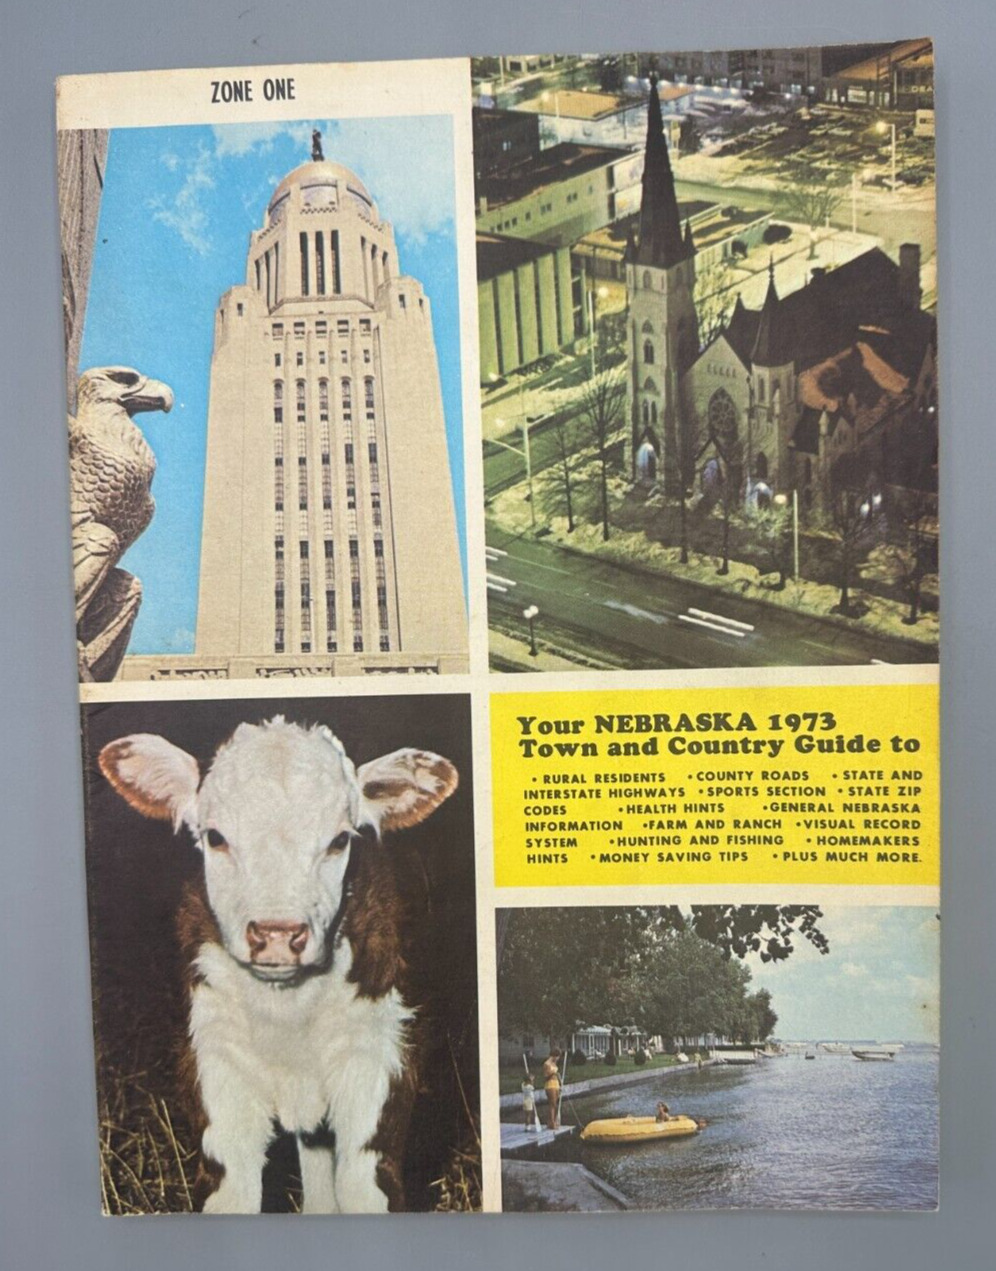 1973 Town and Country Guide to Southeast Nebraska Plat Maps and Advertising